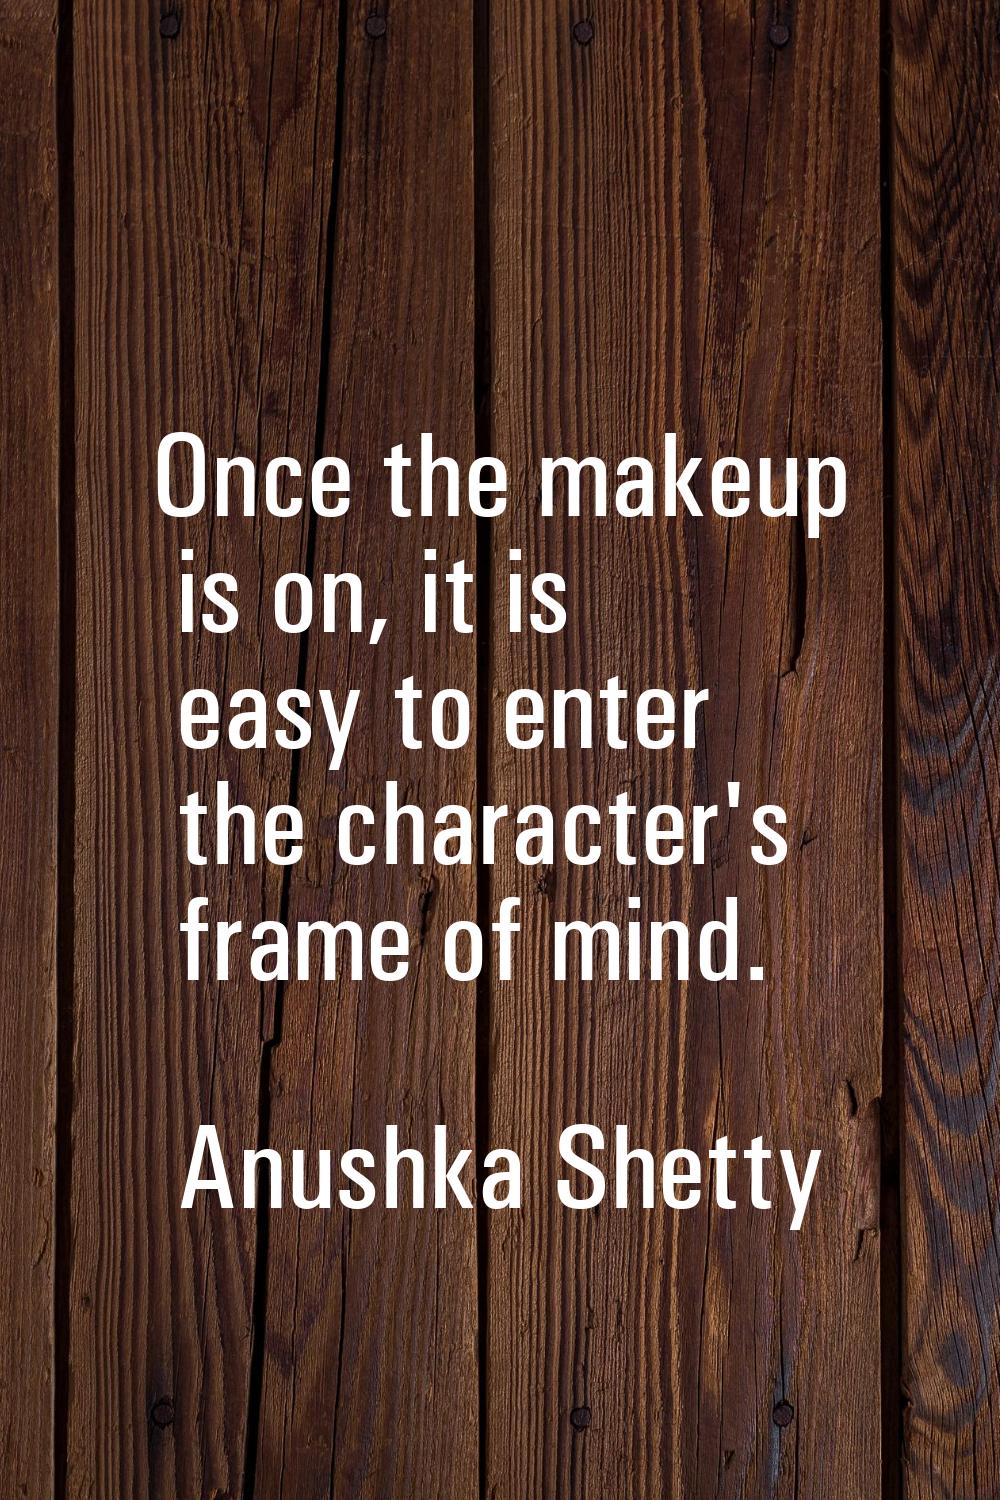 Once the makeup is on, it is easy to enter the character's frame of mind.